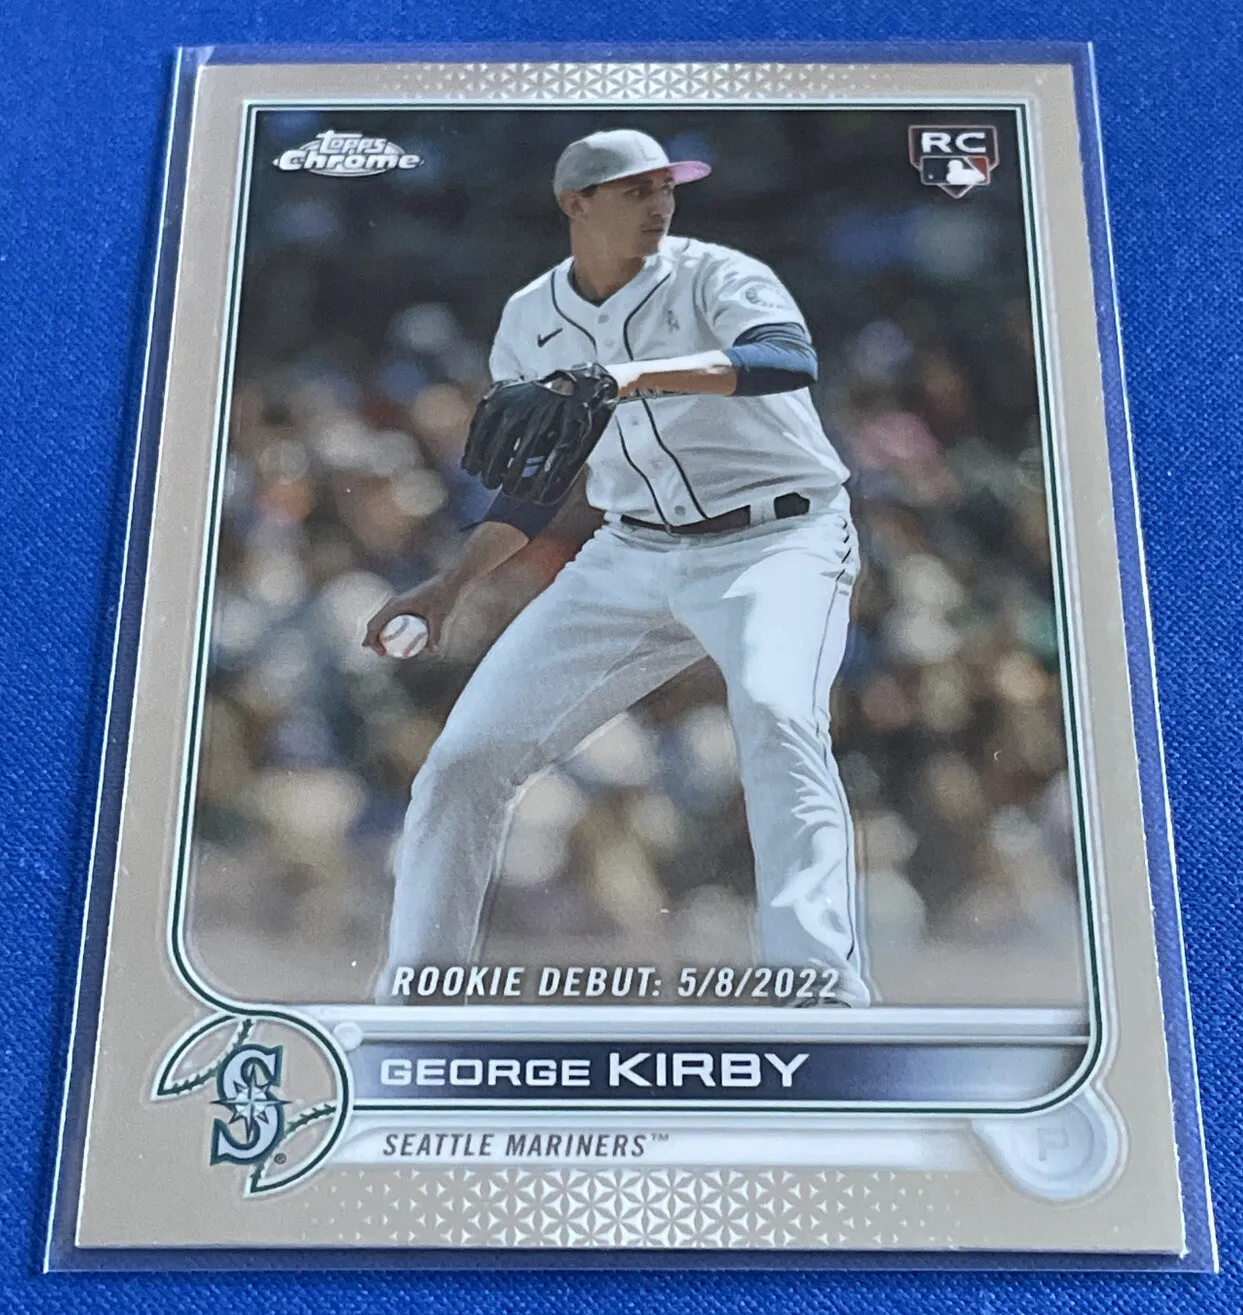 2022 Topps Chrome Update Series #USC101 George Kirby RC Seattle Mariners